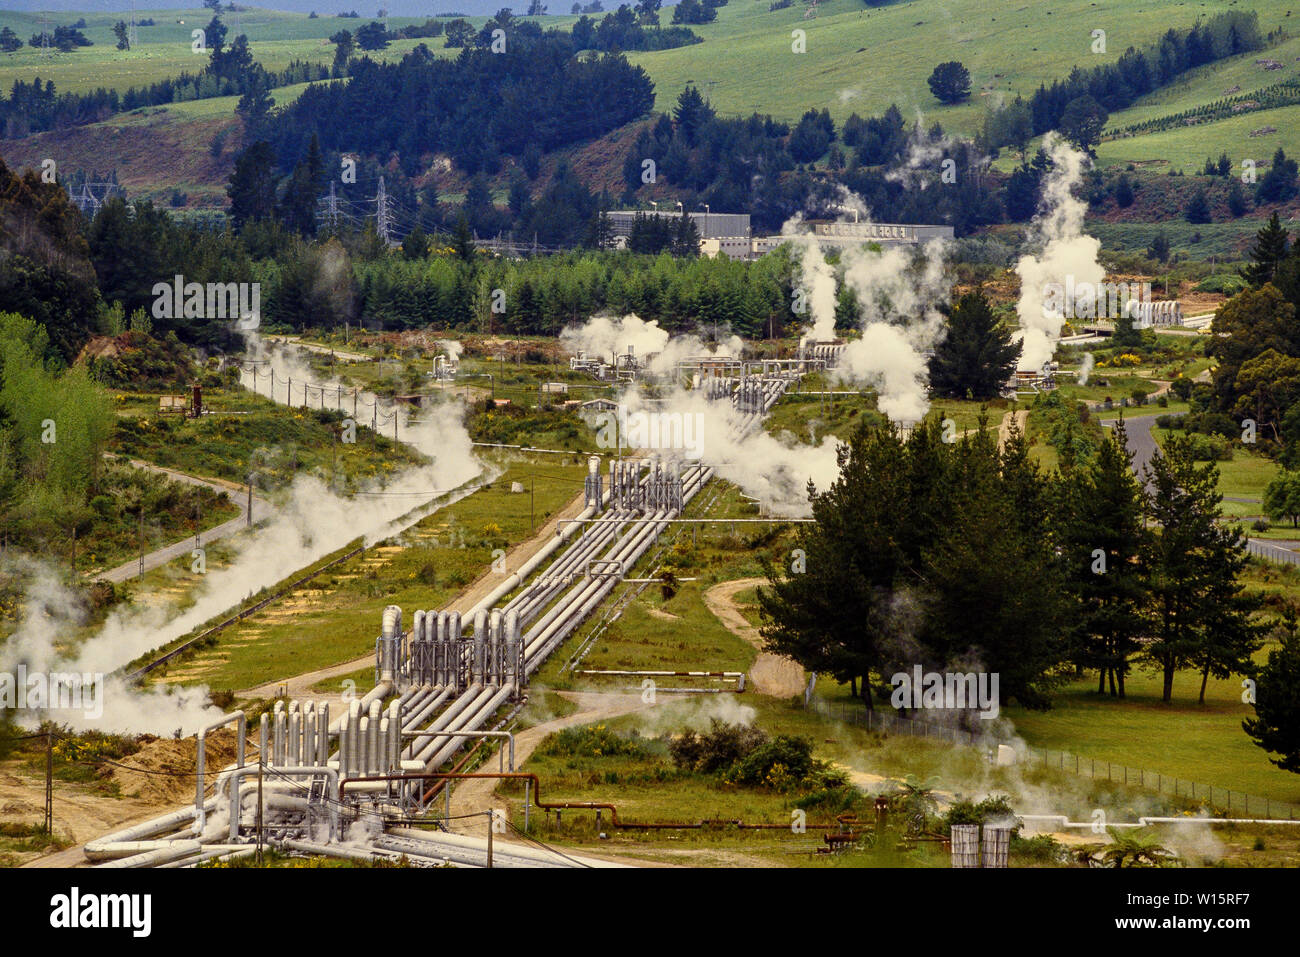 New Zealand, North Island. The Wairakei Power Station is a geothermal power station near the Wairakei Geothermal Field in New Zealand. Wairakei lies i Stock Photo